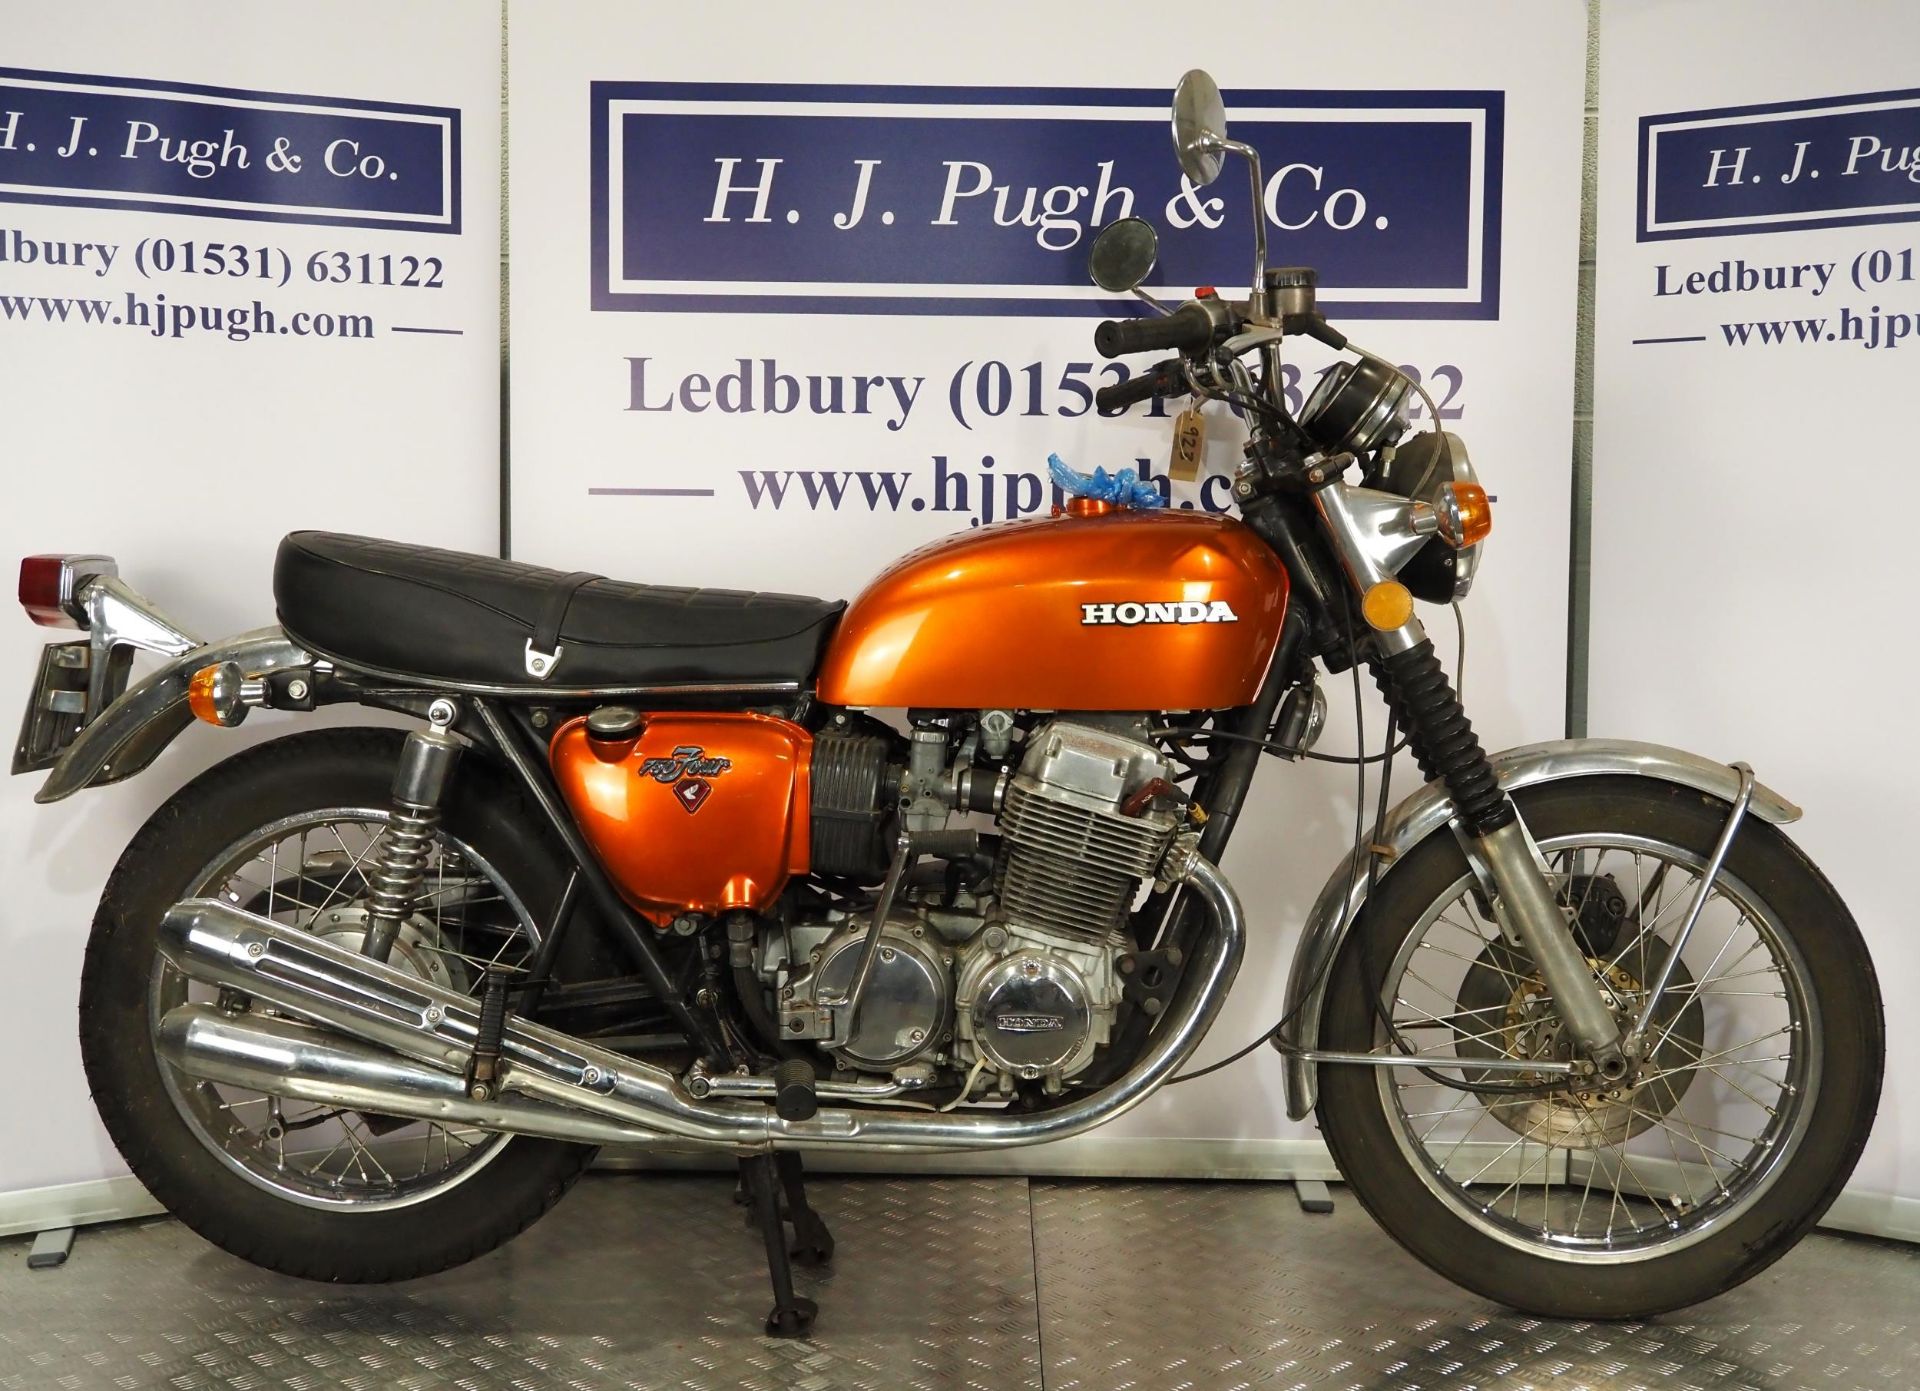 Honda 750 Four motorcycle. 1972. 736cc. Frame No. 2024351 Engine No. 2031888 Engine turns over but - Image 2 of 7